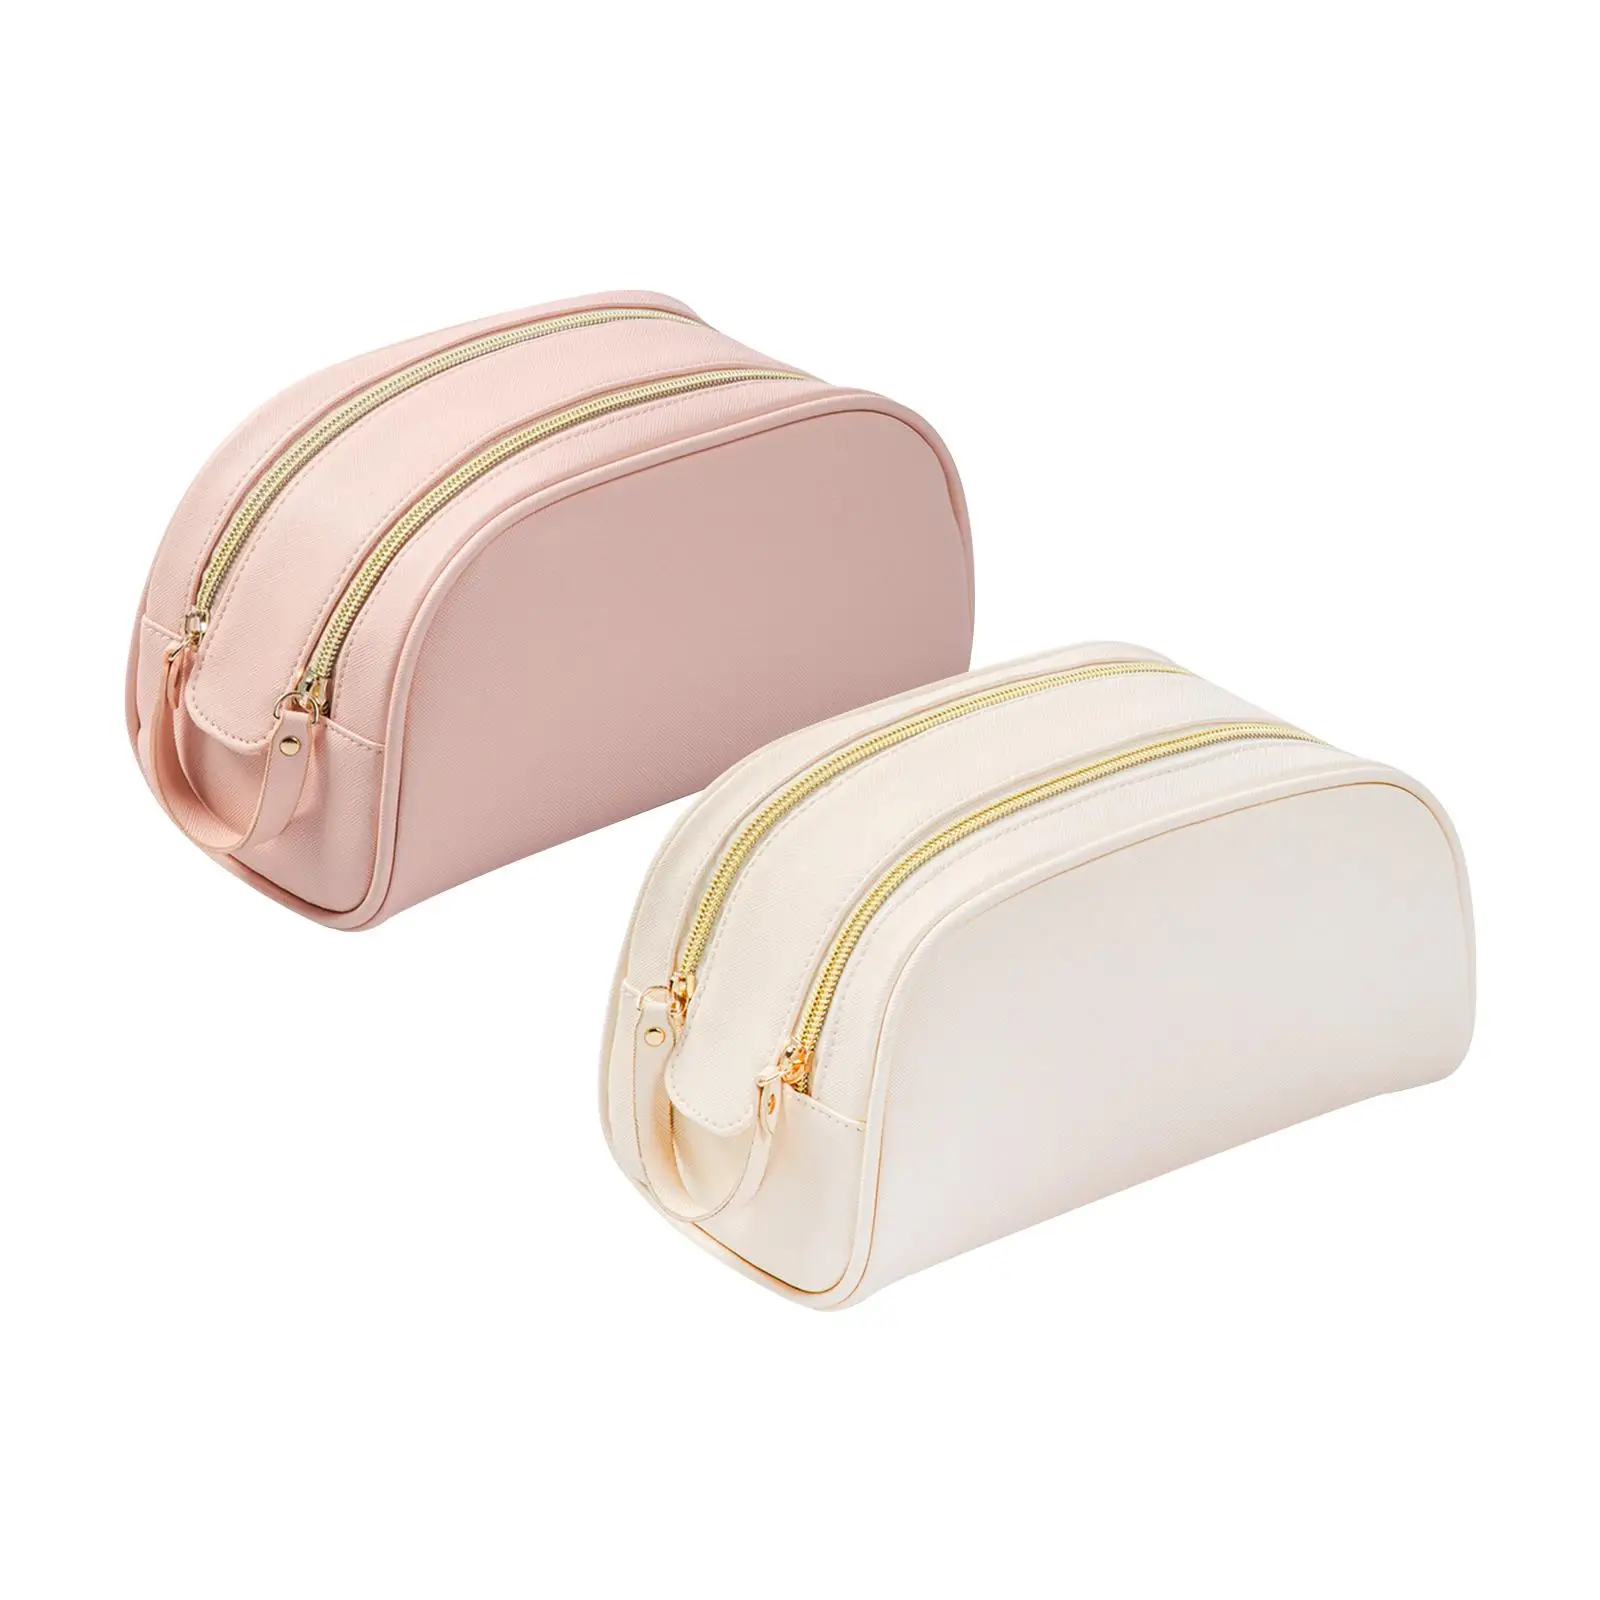 Makeup Bag Toiletry Accessories Portable for Vacations Woman Business Trips